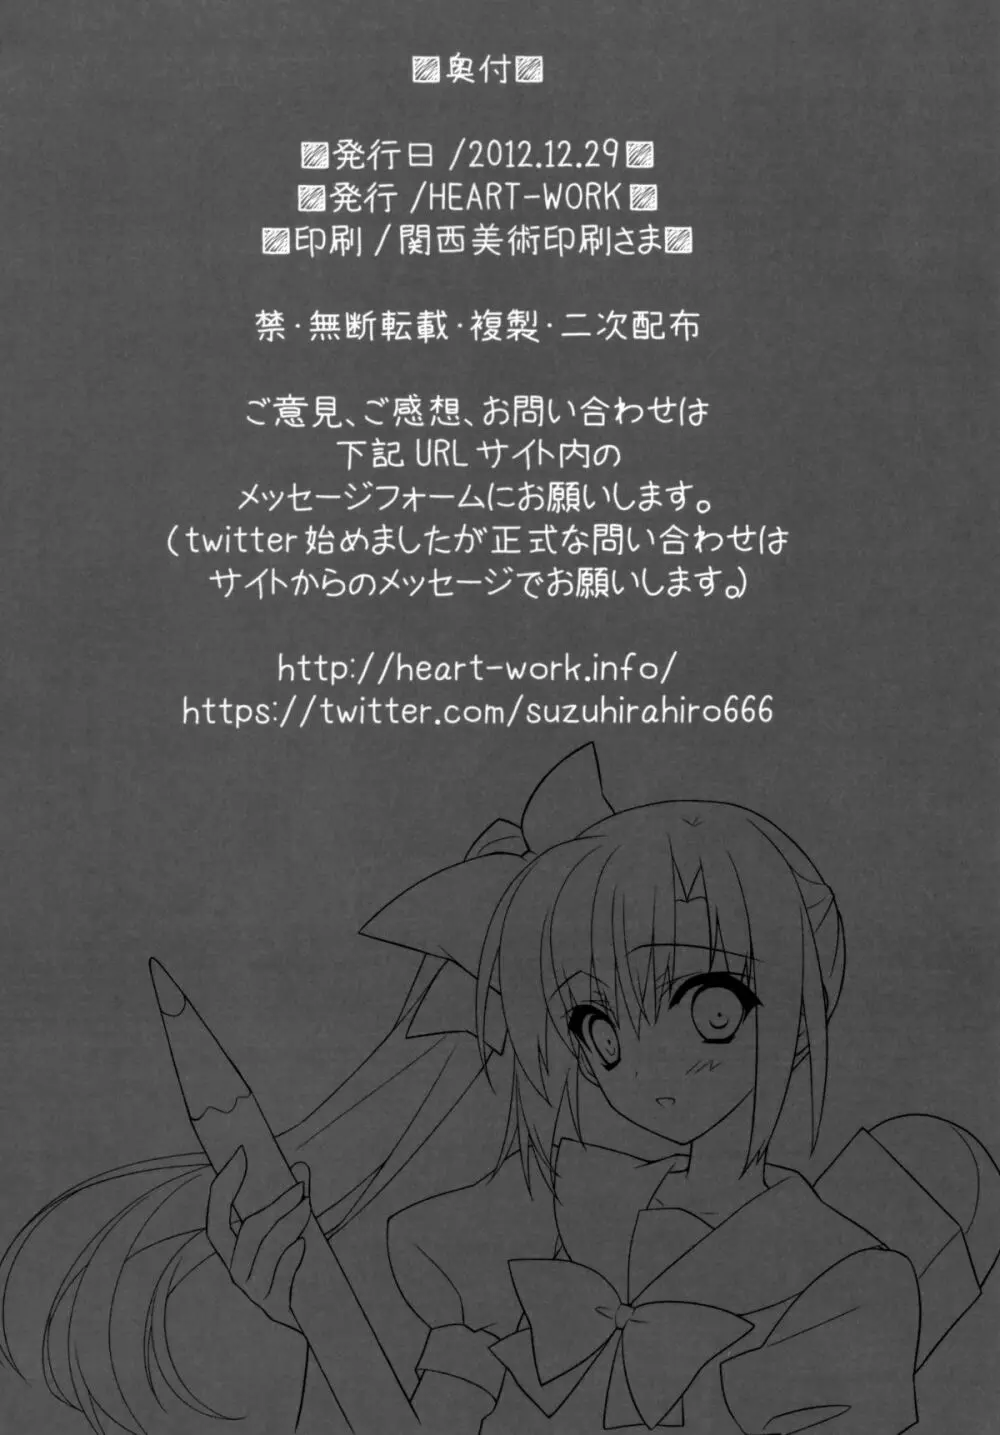 (C83) [HEART WORK (鈴平ひろ)] Waiting for you – HEART-WORK 2012.12.29 (よろず) 8ページ